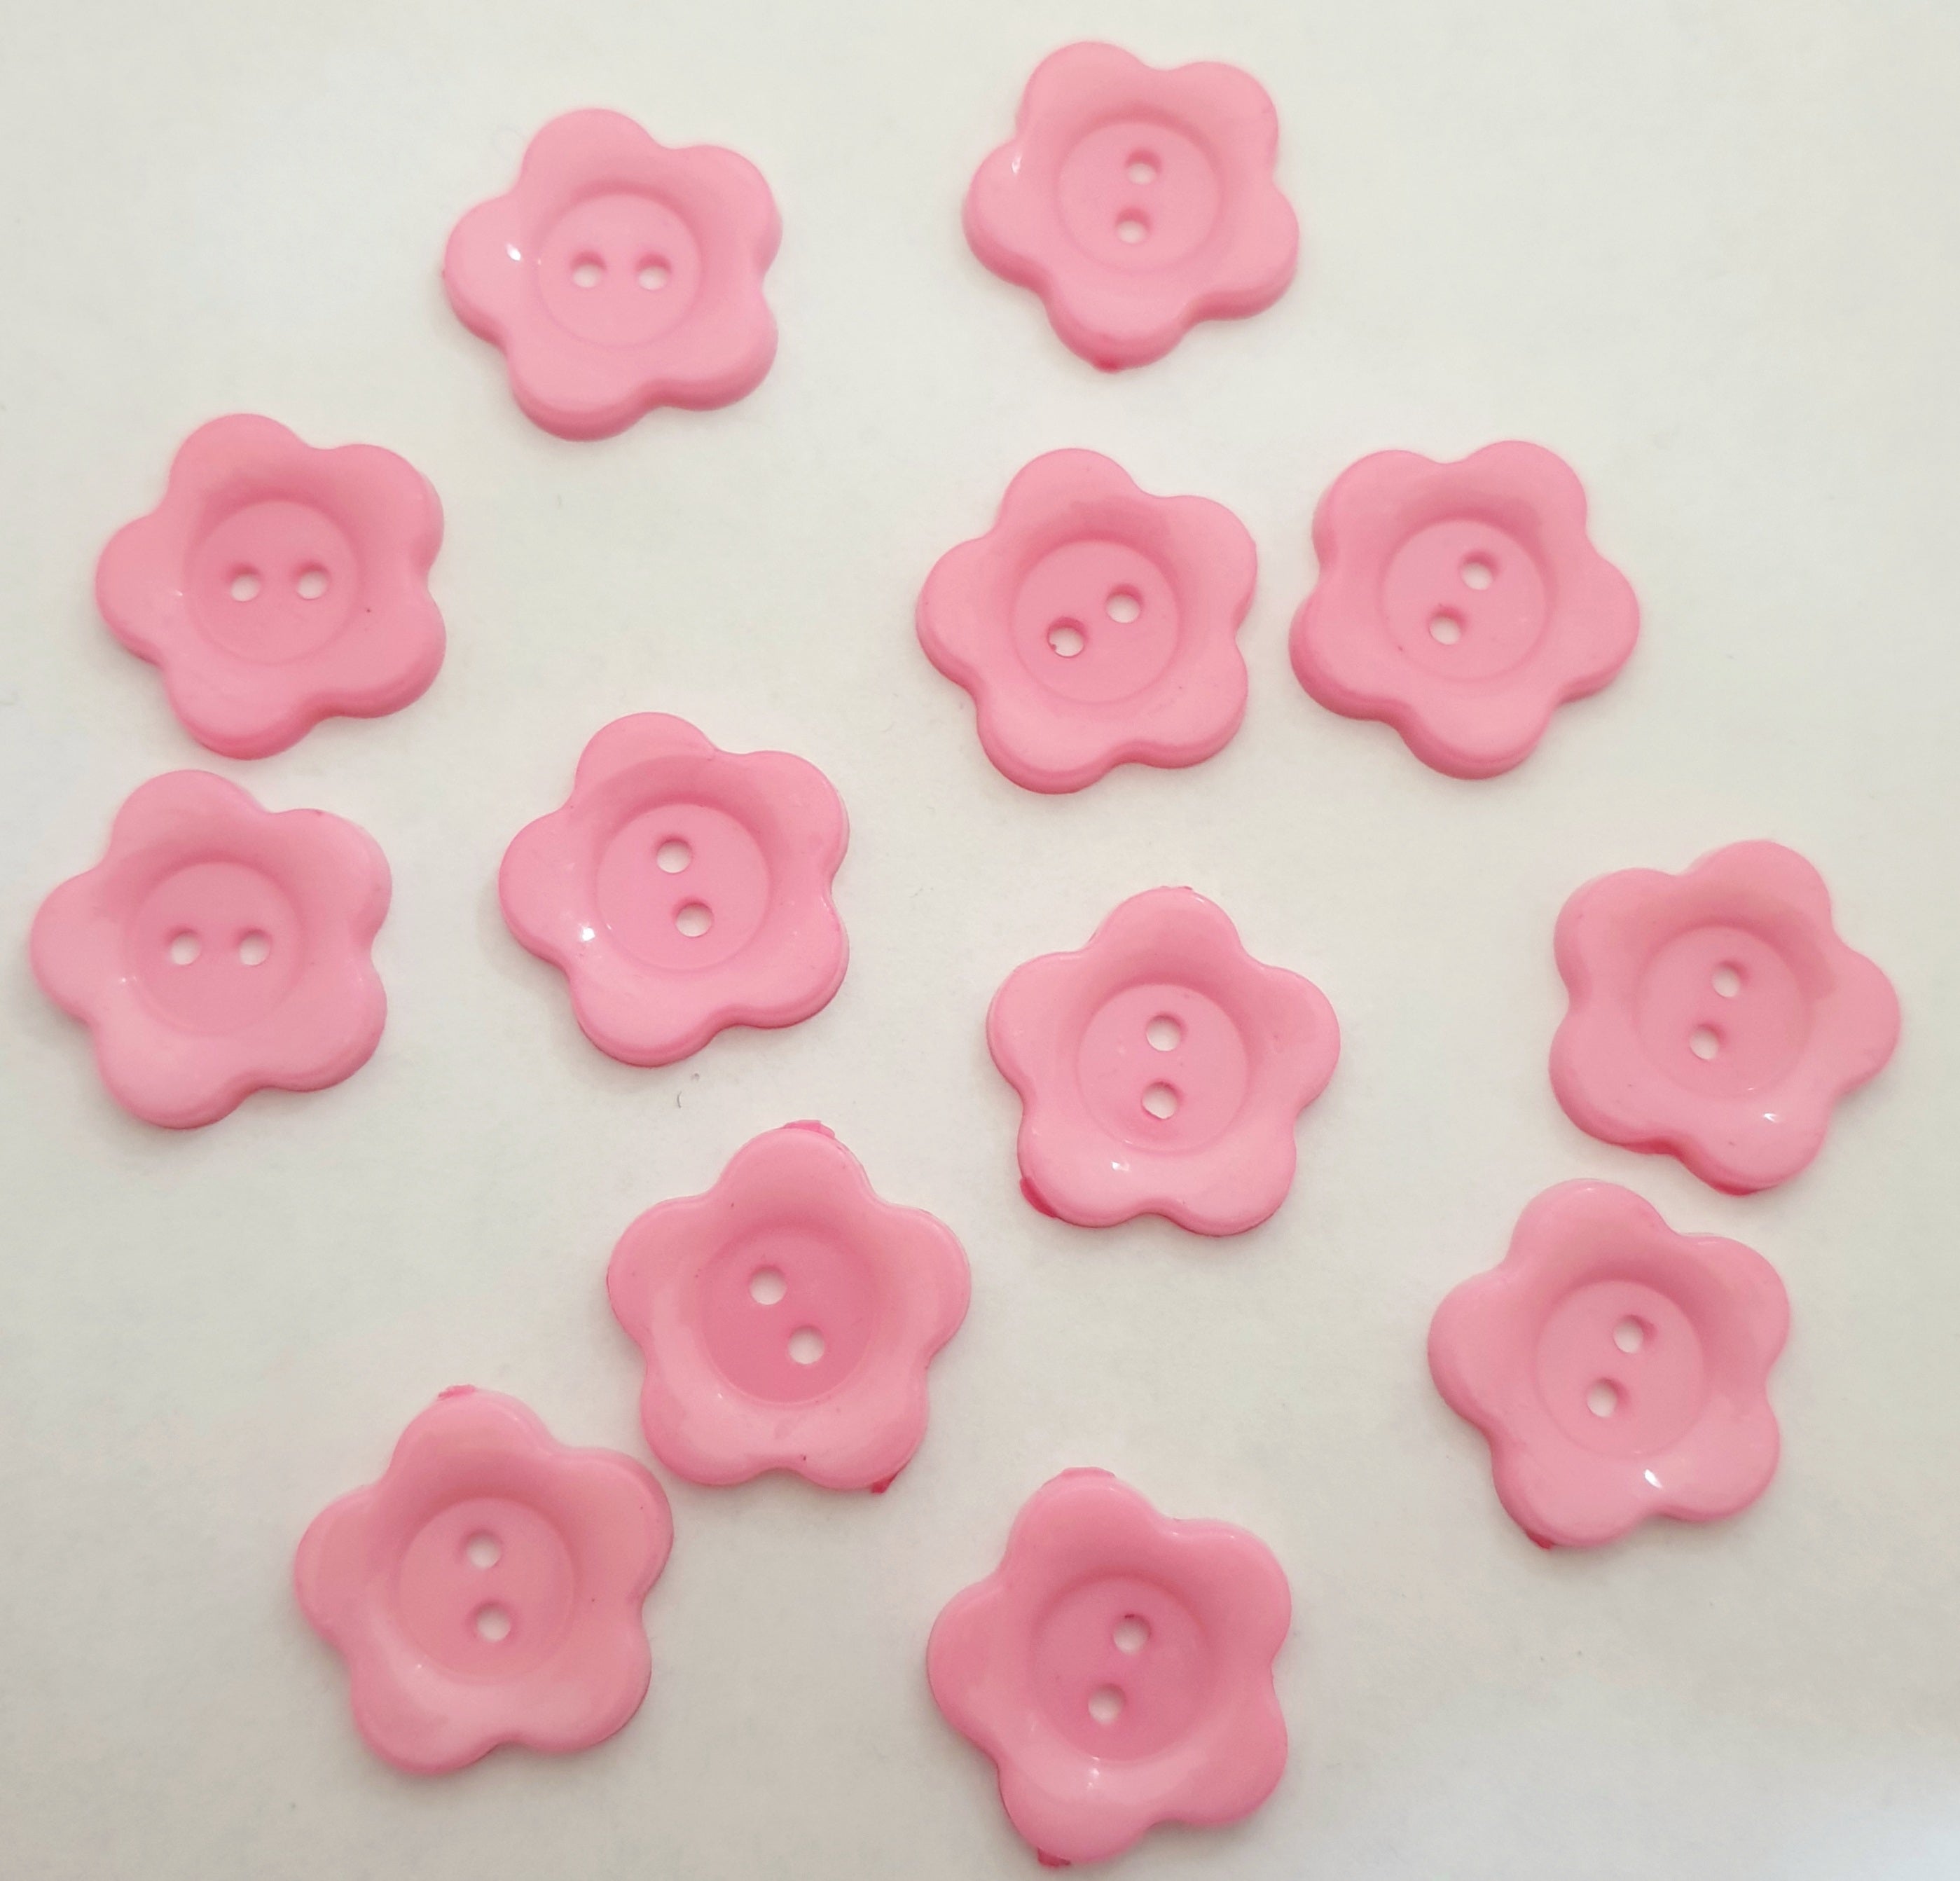 MajorCrafts 34pcs 22mm Light Pink Shaped 2 Holes Resin Sew-on Buttons